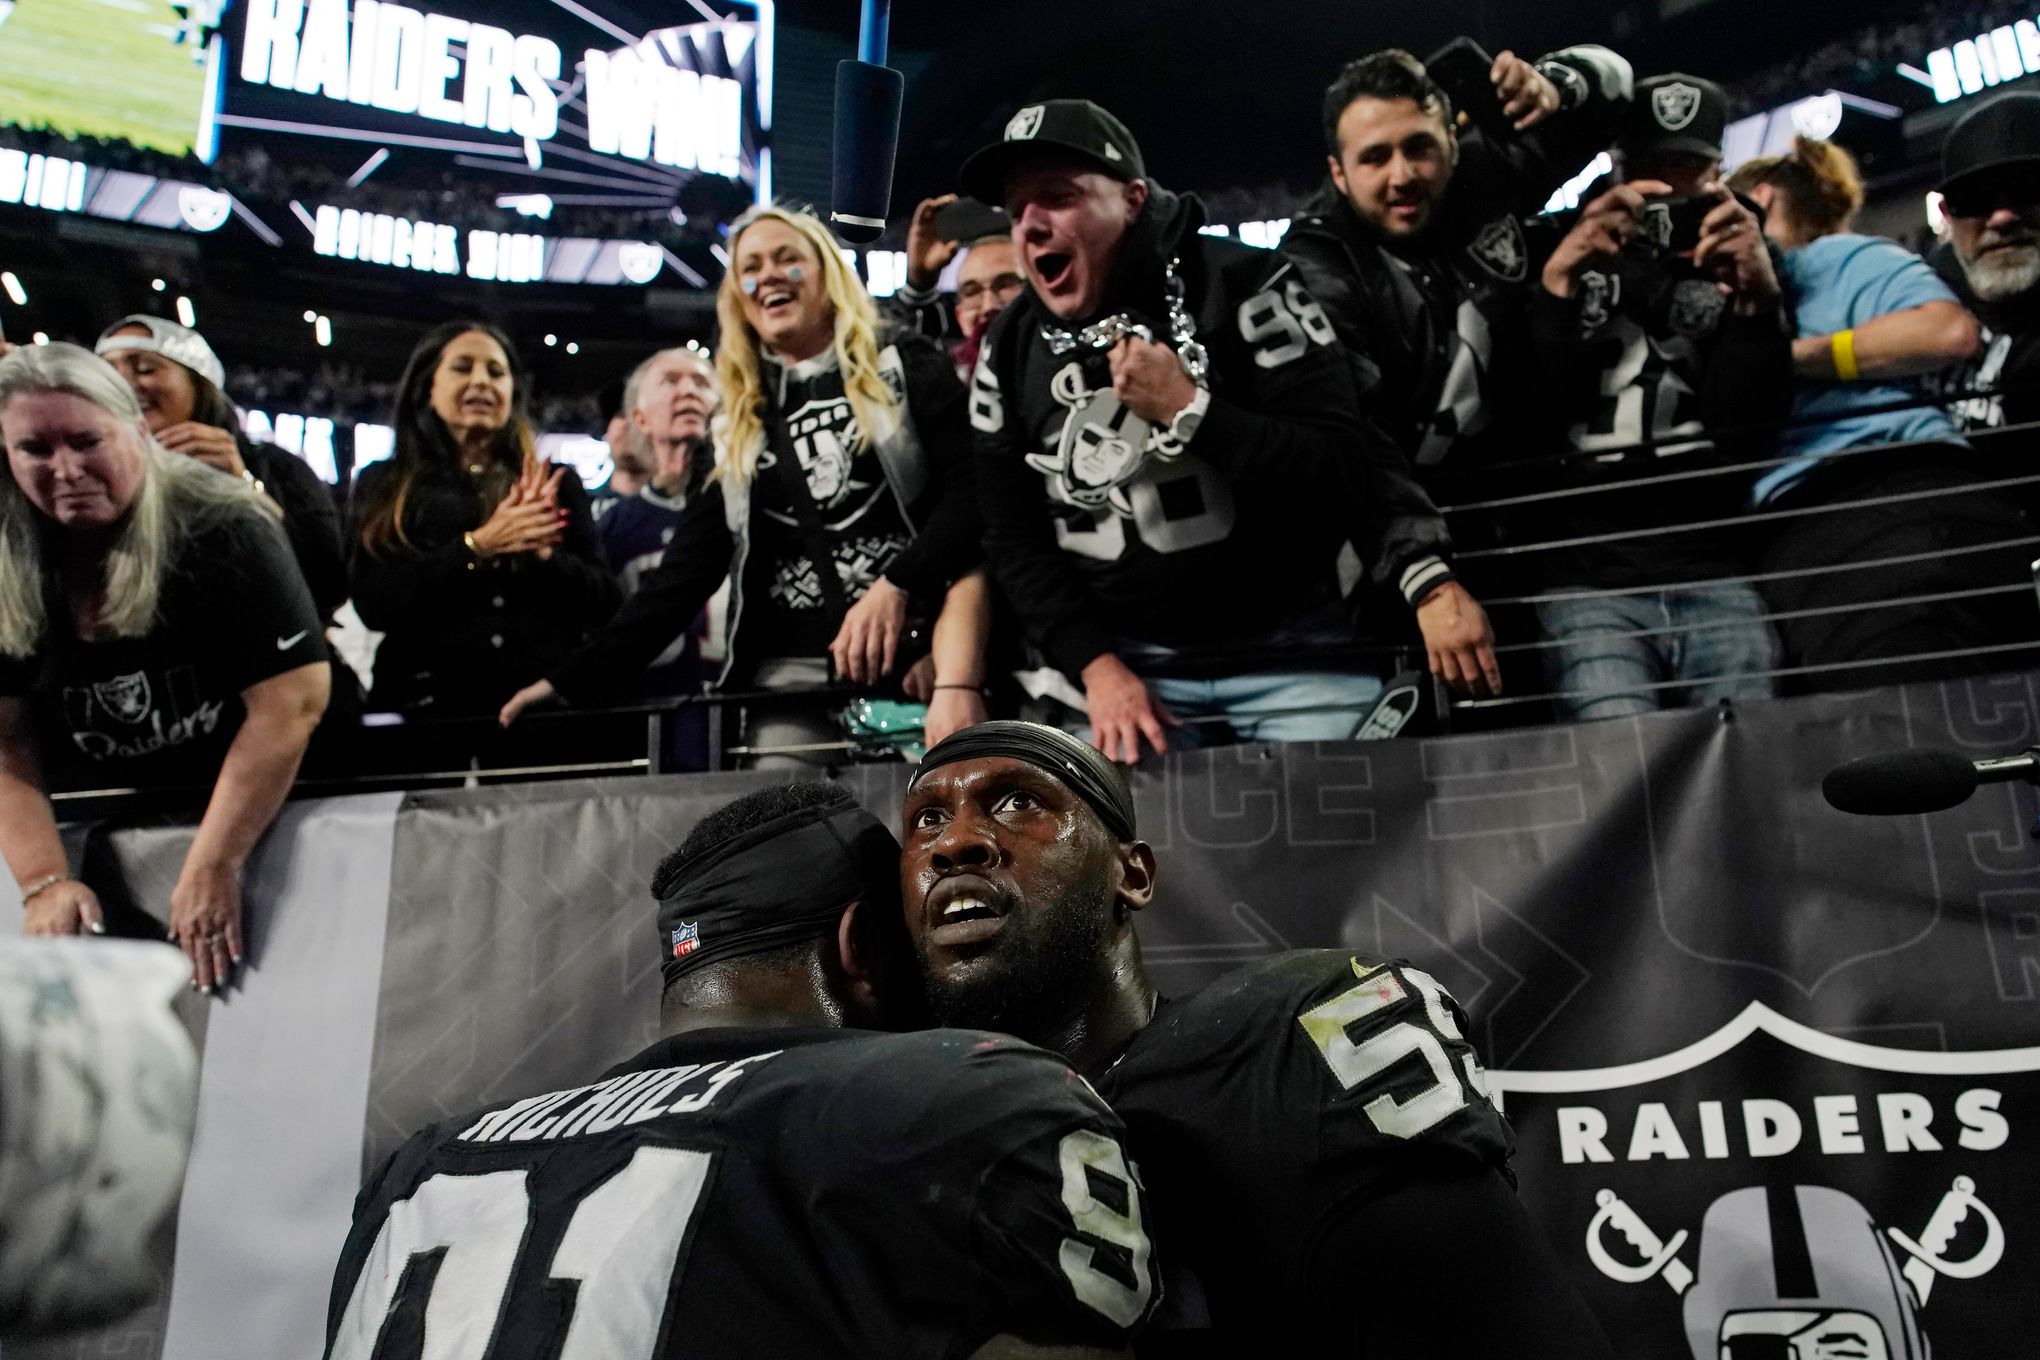 NFL Twitter goes bonkers after Raiders unreal final play win